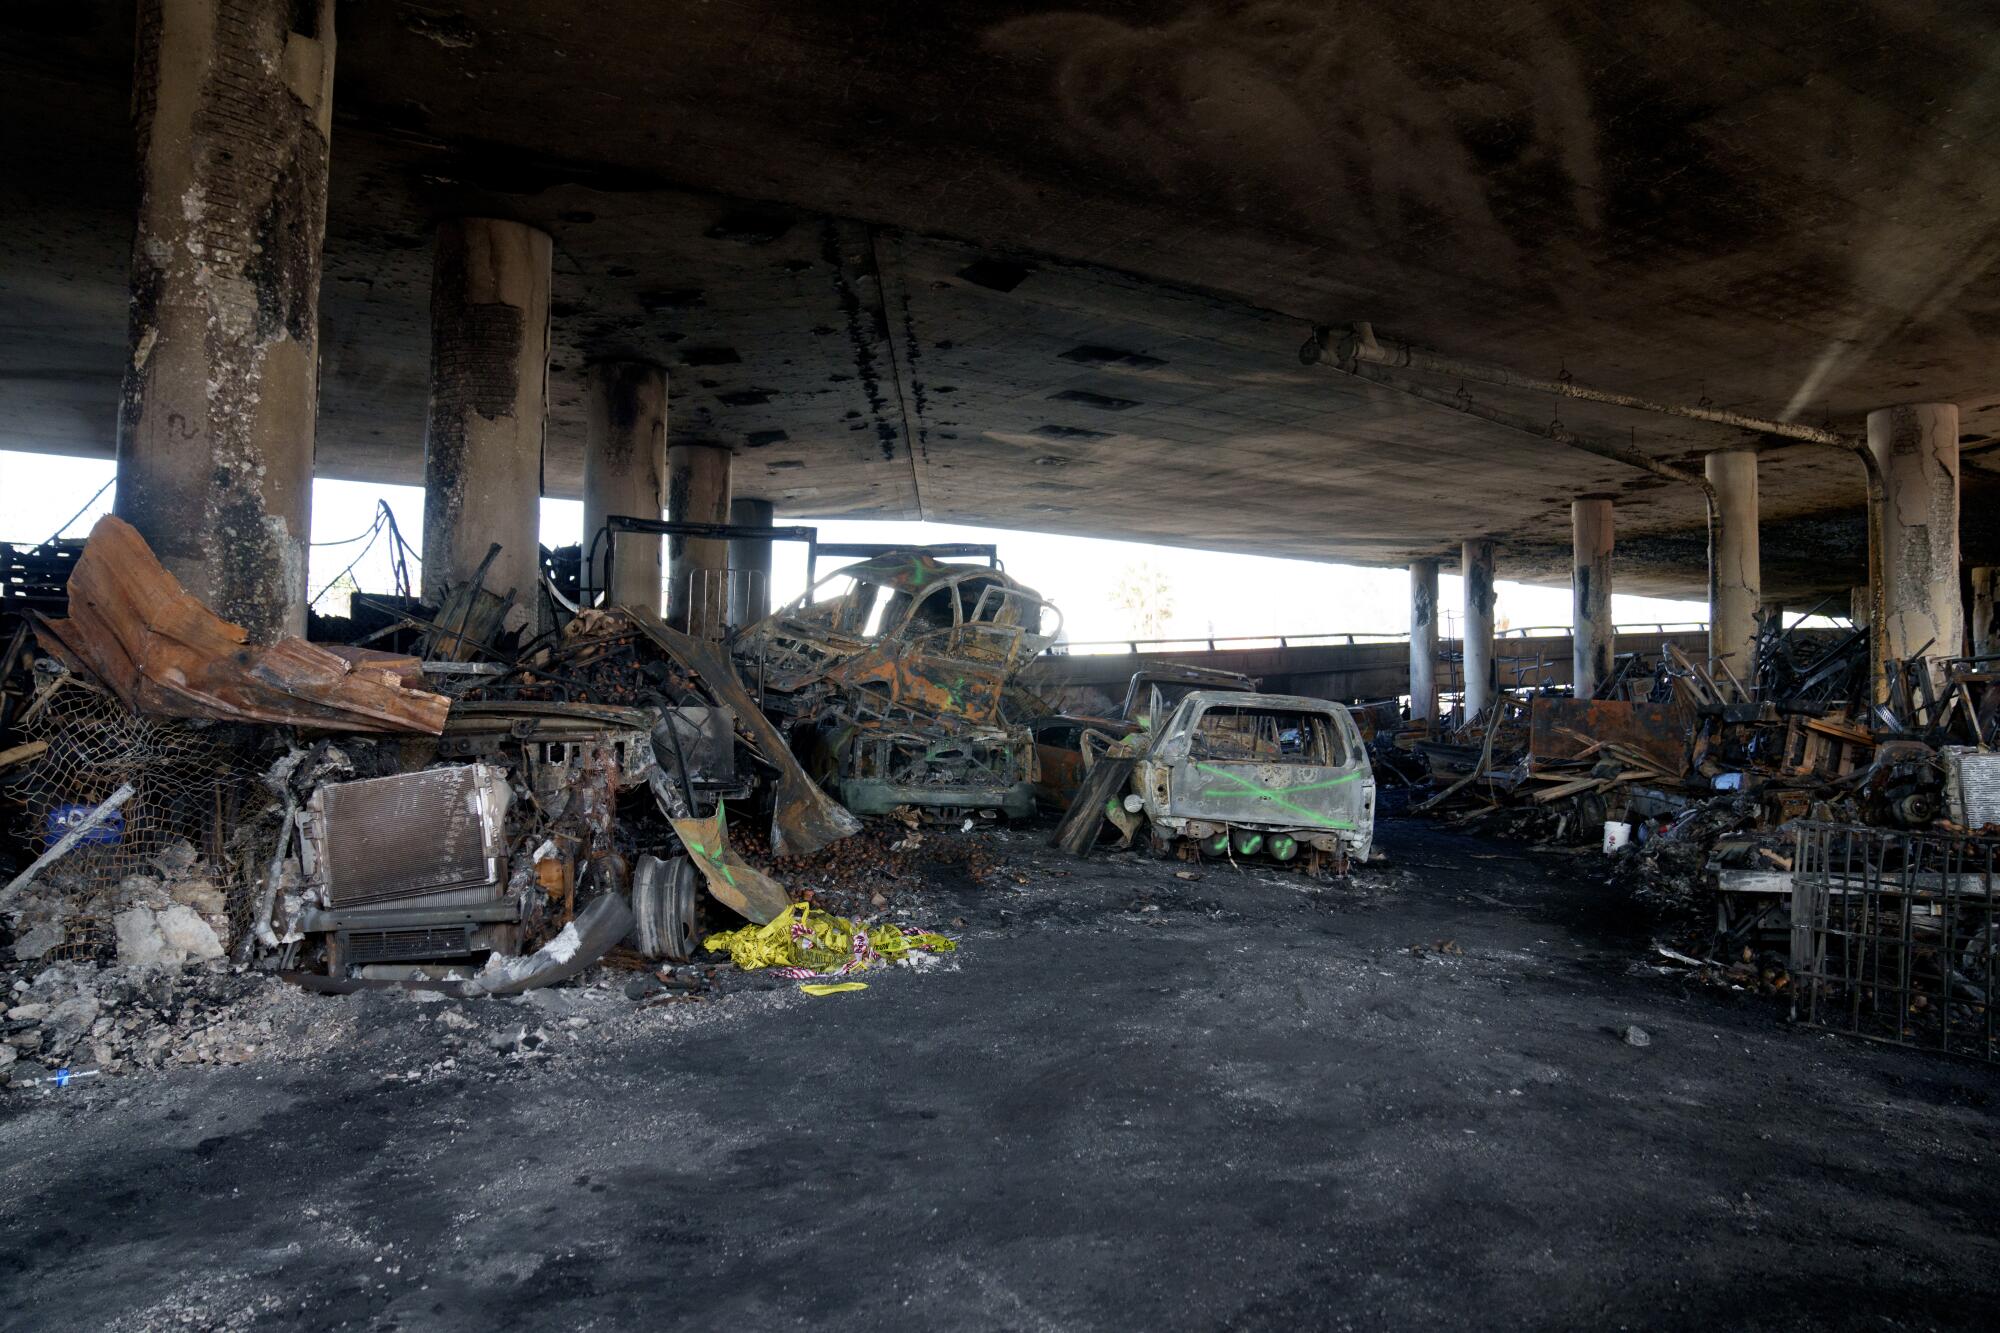 Burned debris including vehicles piled next to the charred support posts underneath a freeway.